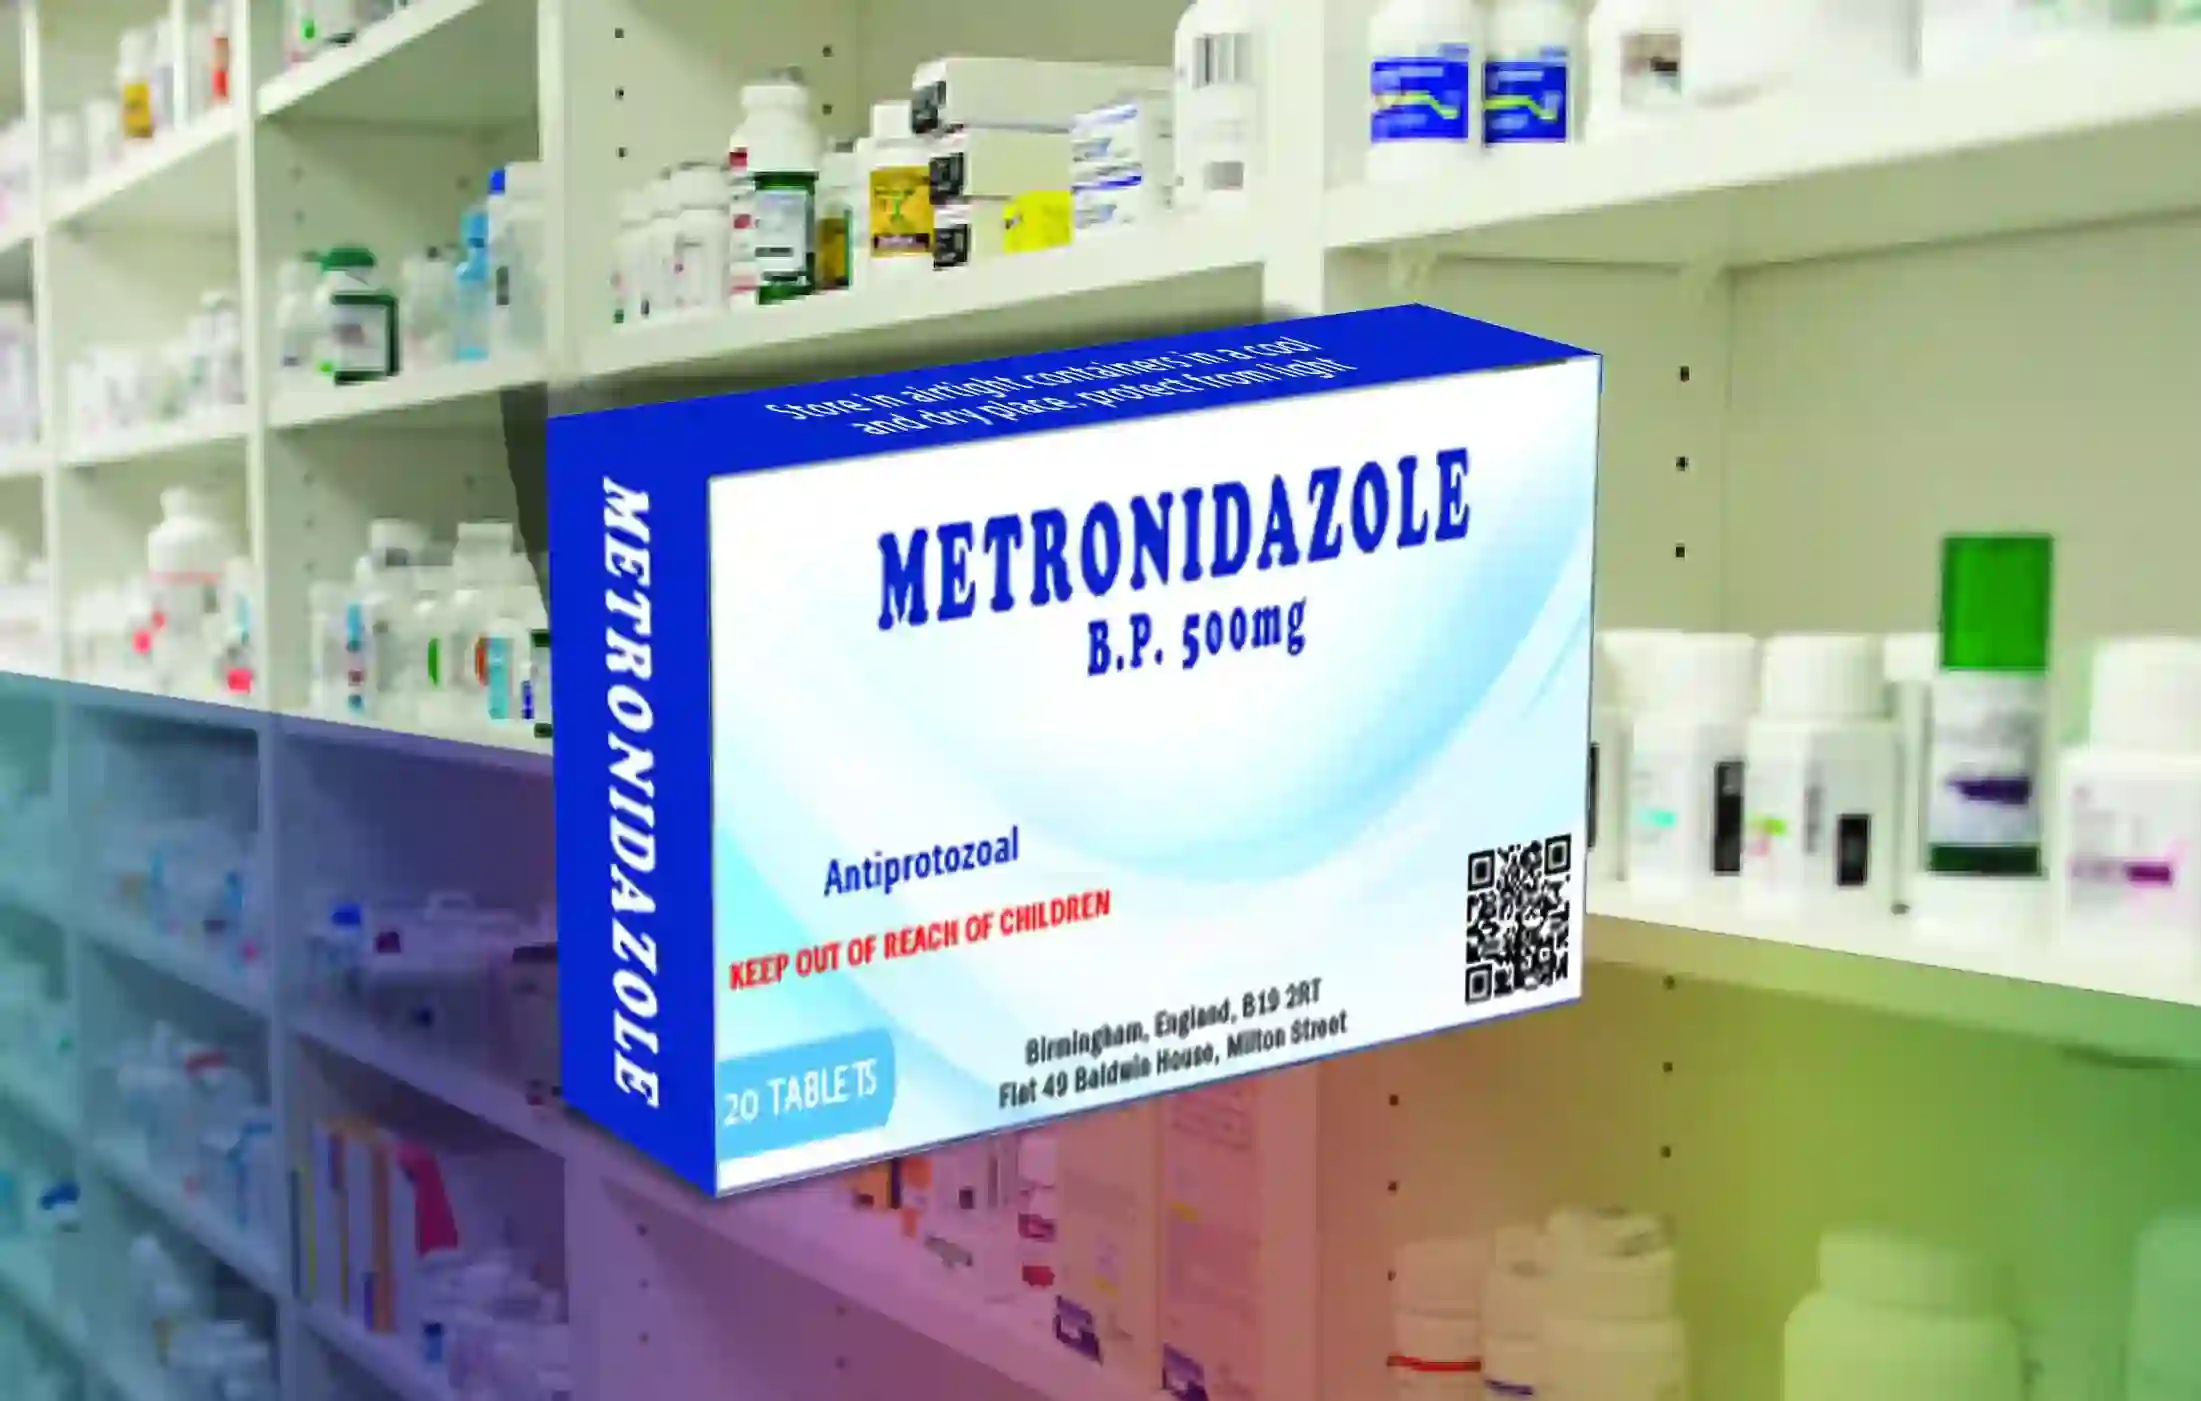 'metronidazole tablets', 'antibiotic  tablets', 'metronidazole 500mg tablets', 'metronidazole'